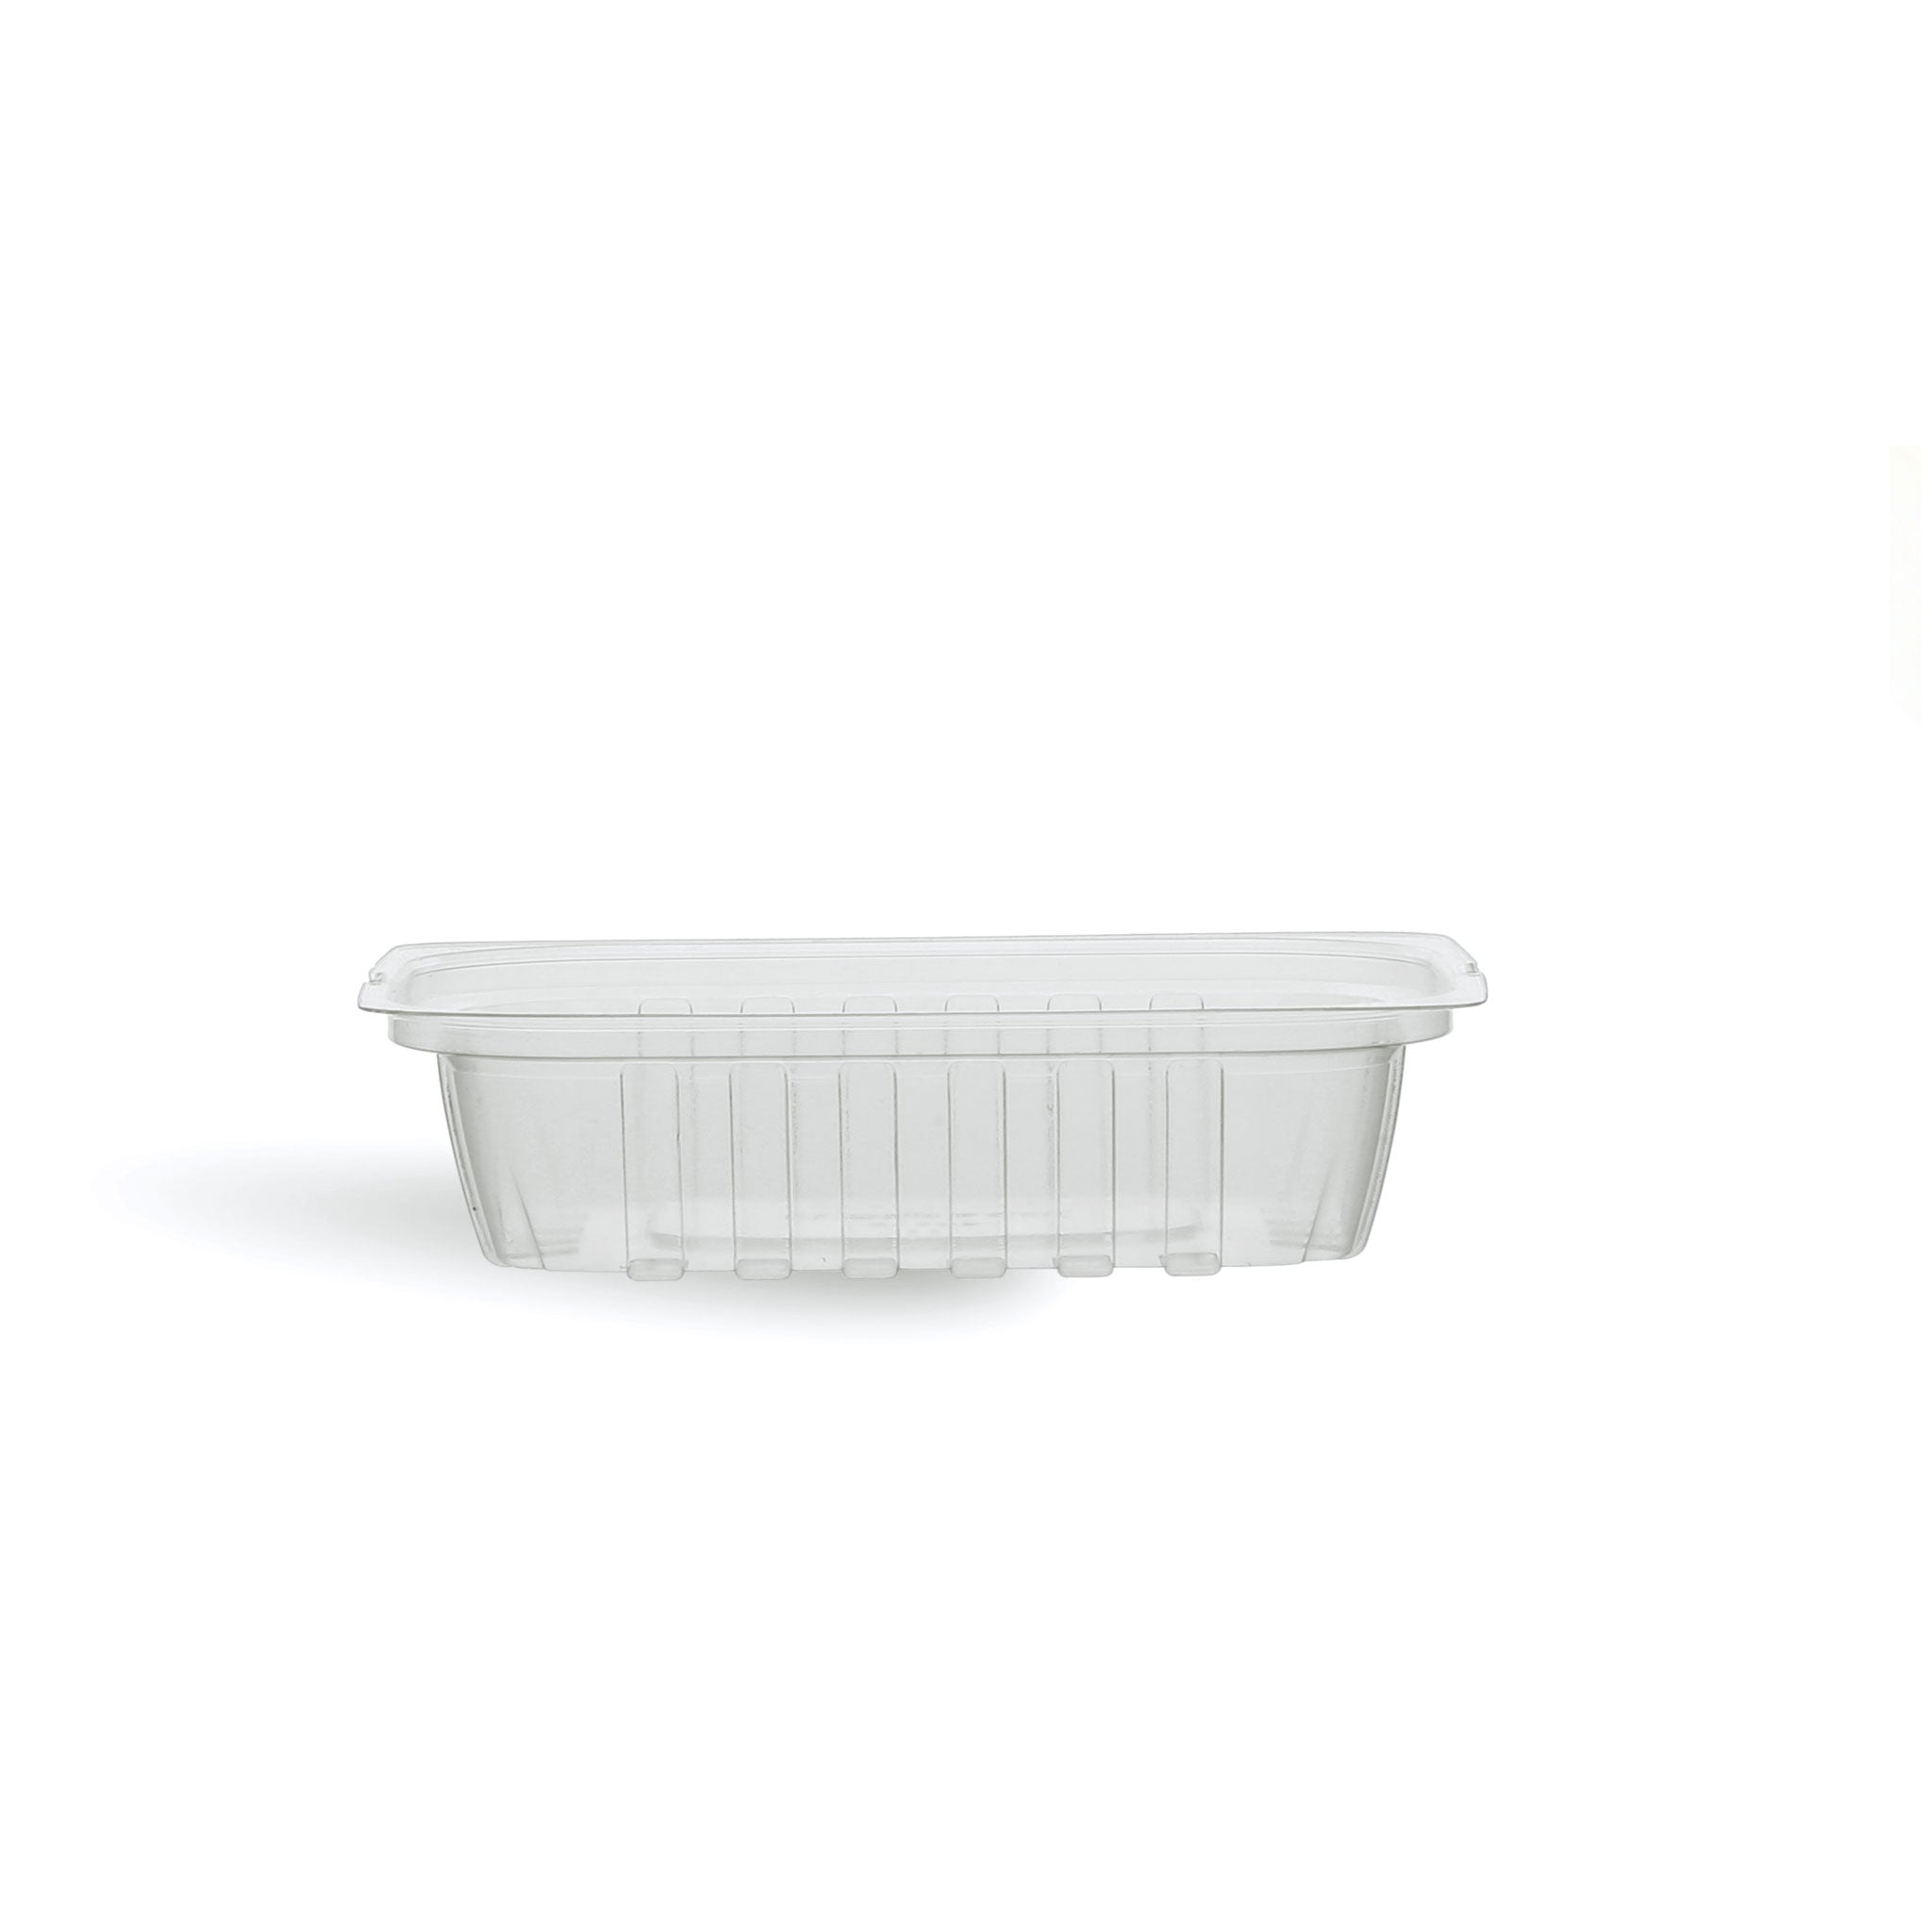 Clear Rectangular Container With Lid - Hotpack UAE